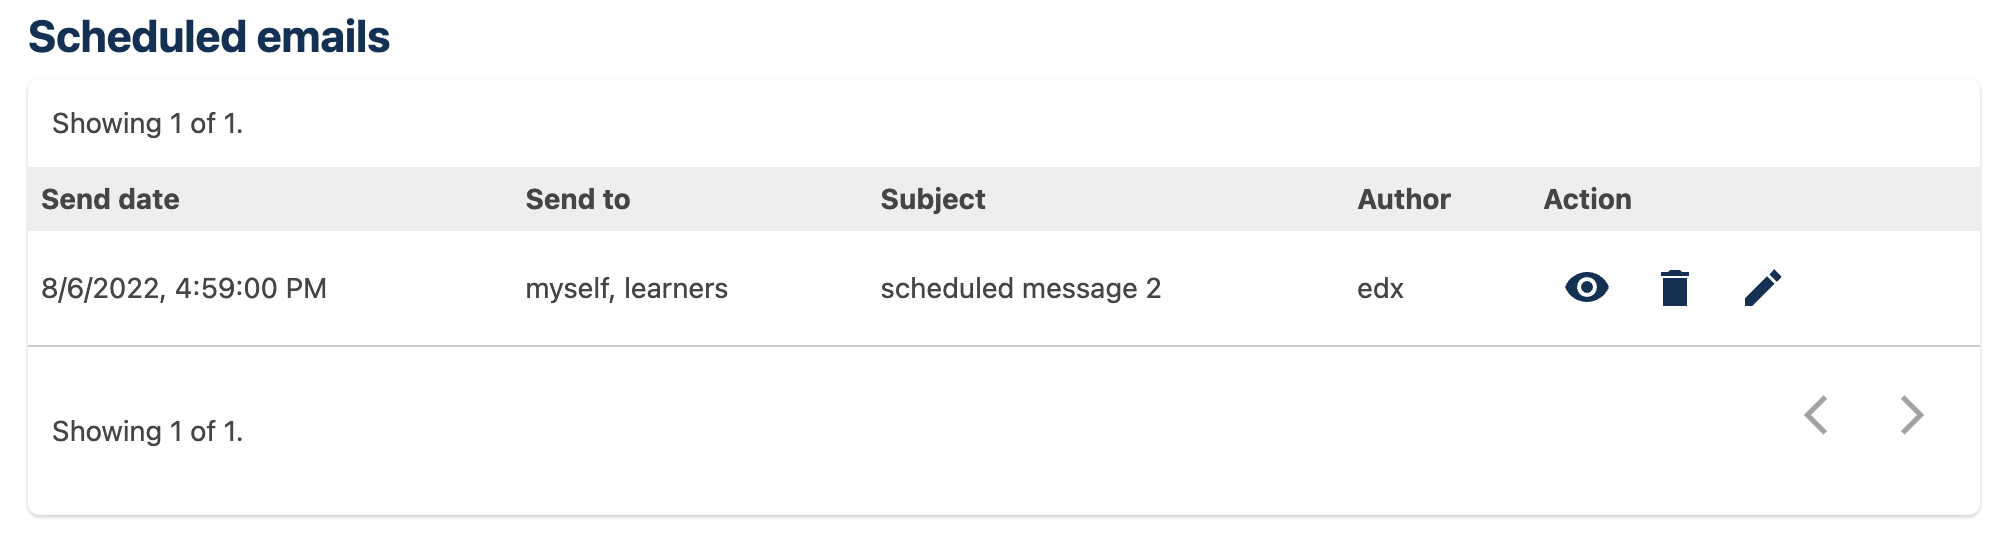 A tabular list of scheduled email messages, with columns for *send date*, *send to*, *subject*, *author*, and *action*.